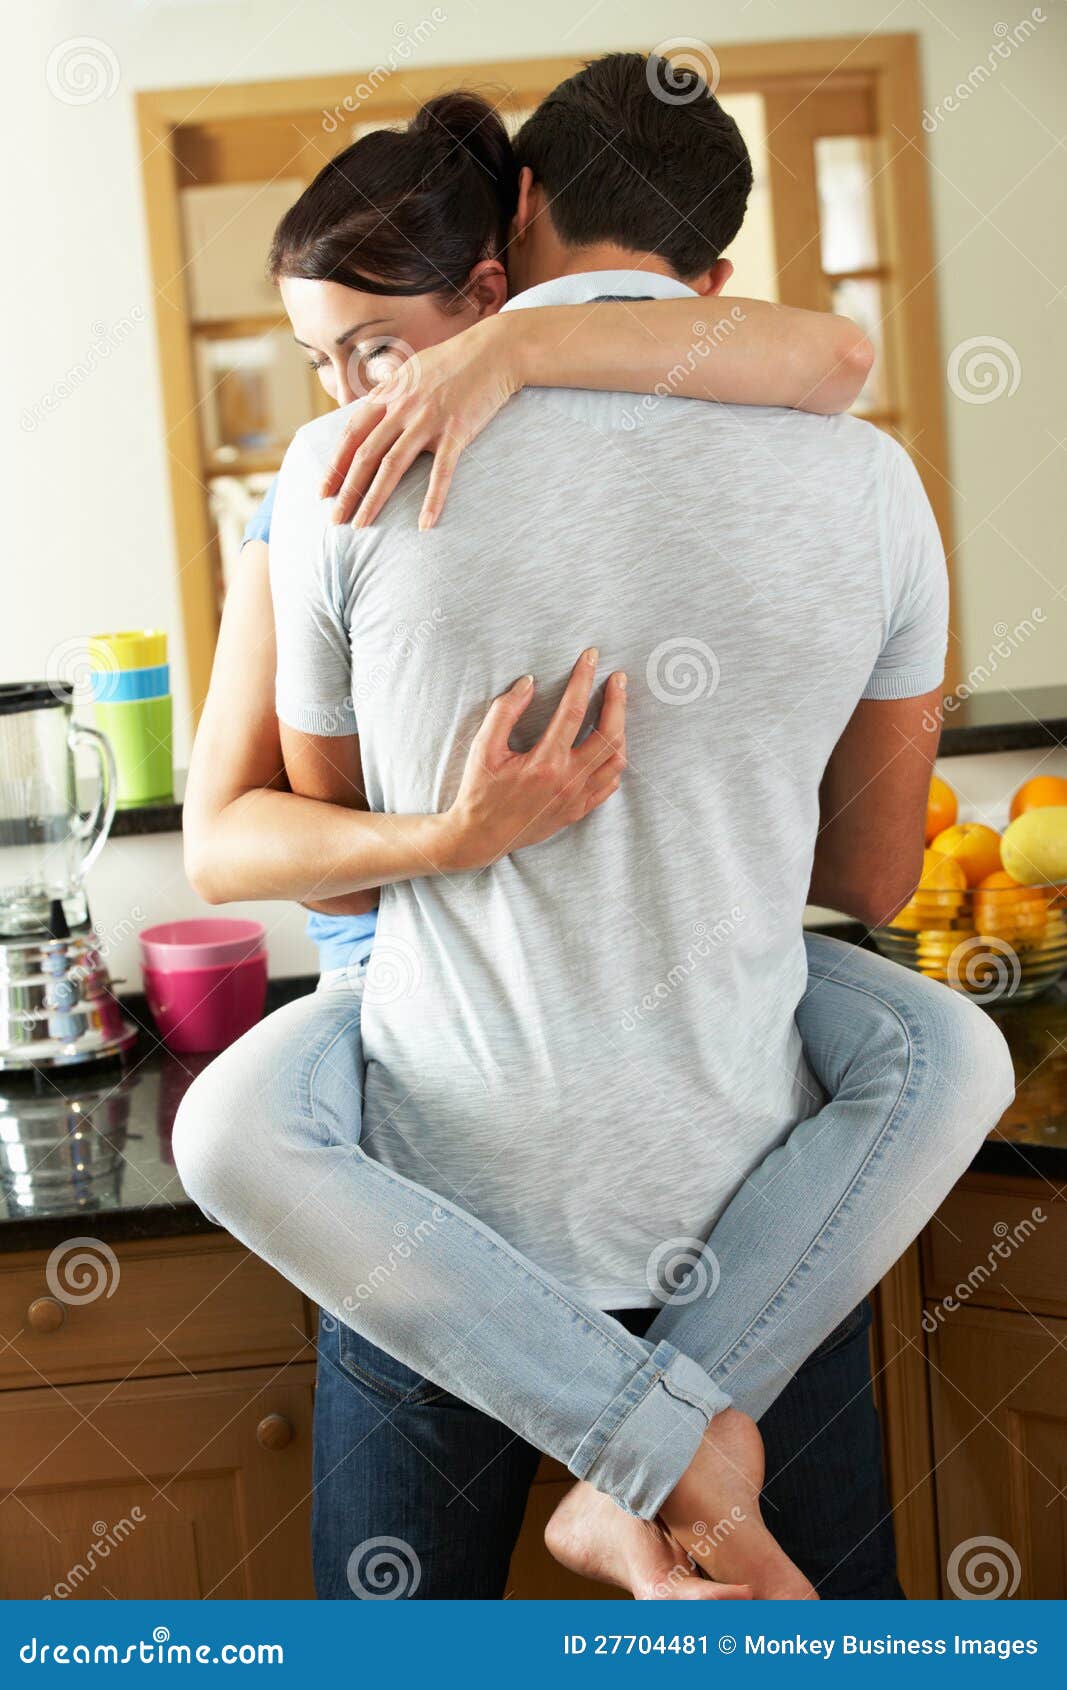 Romantic Couple Hugging in Kitchen Stock Image - Image of sitting ...